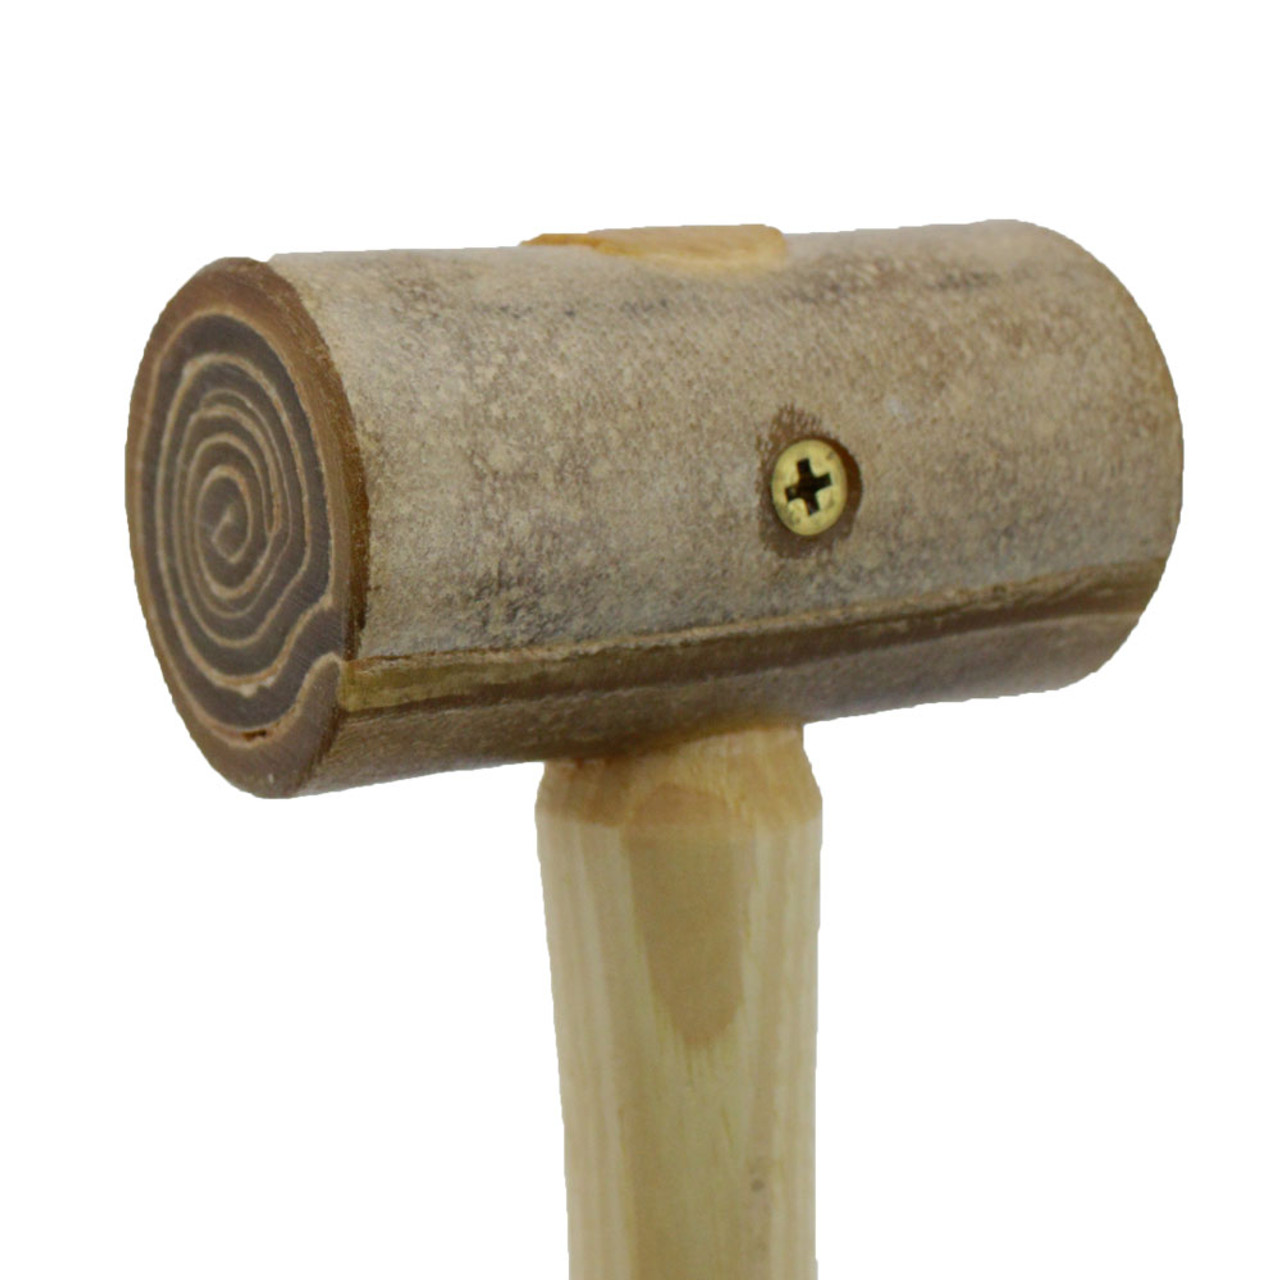 Rawhide Mallet Hammer 1-1/4, Quality Made Jewelry Hammer